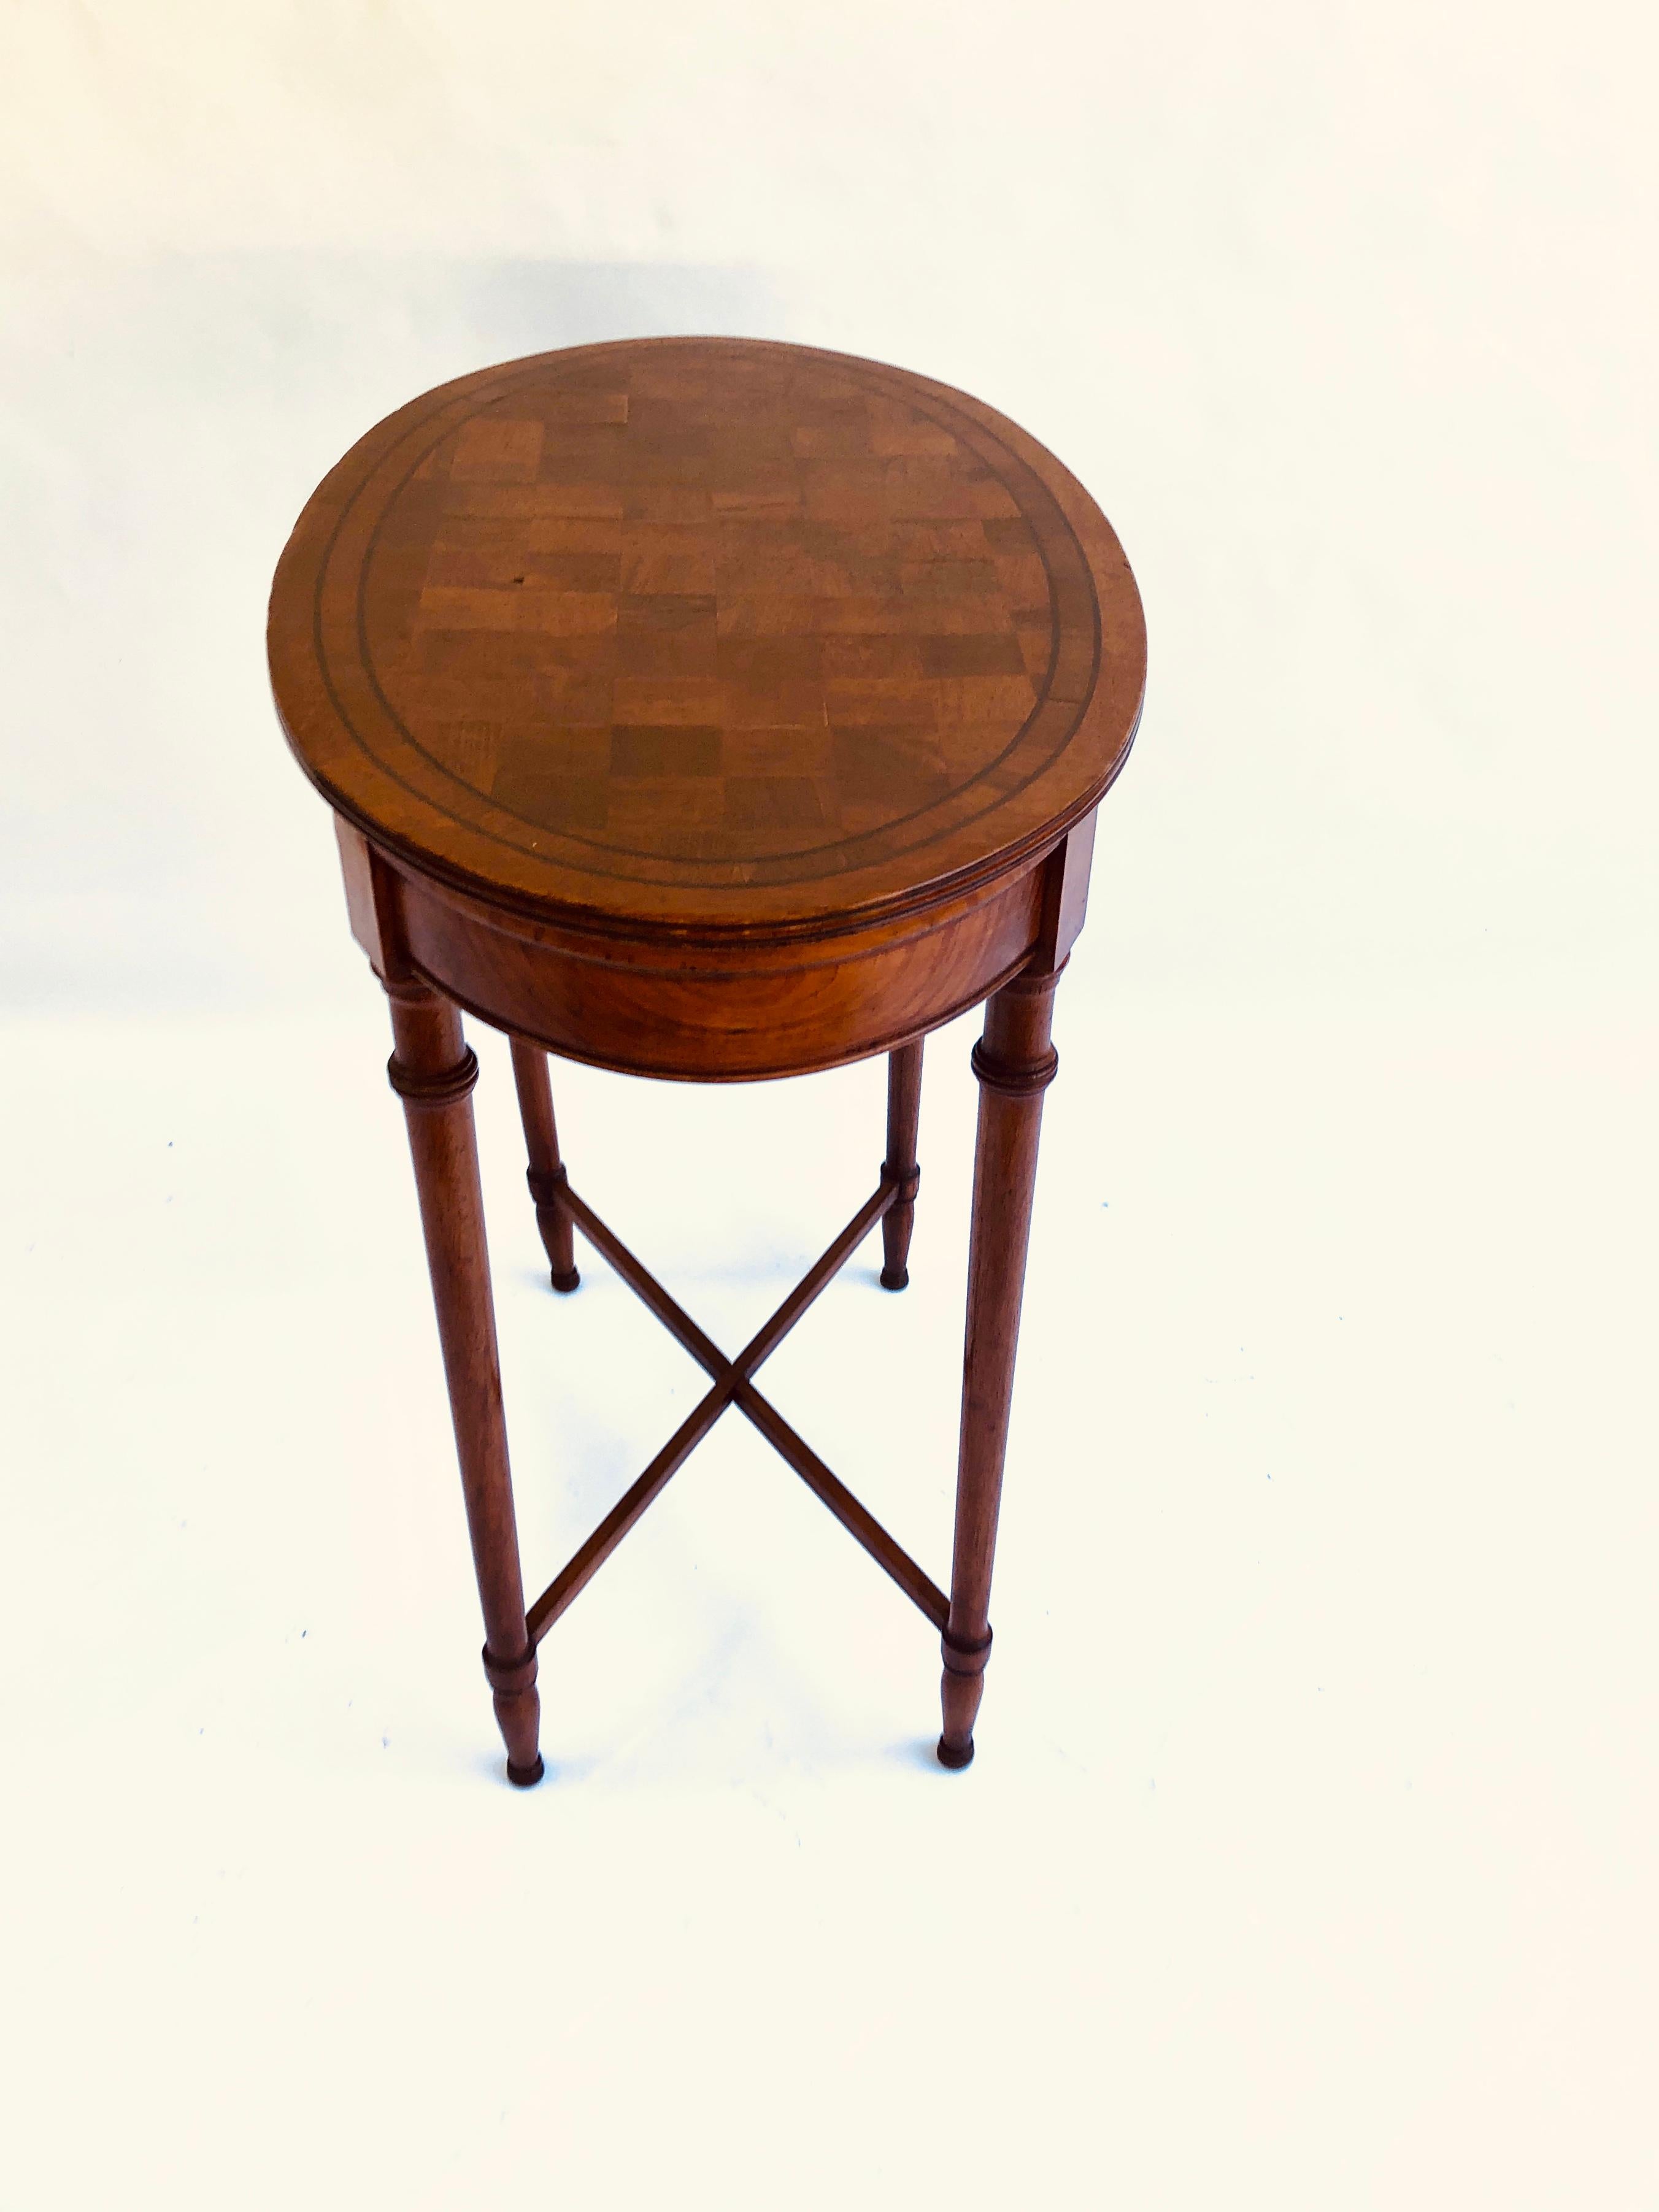 Early 20th Century Quality Victorian Antique Oval Walnut Chequered Table